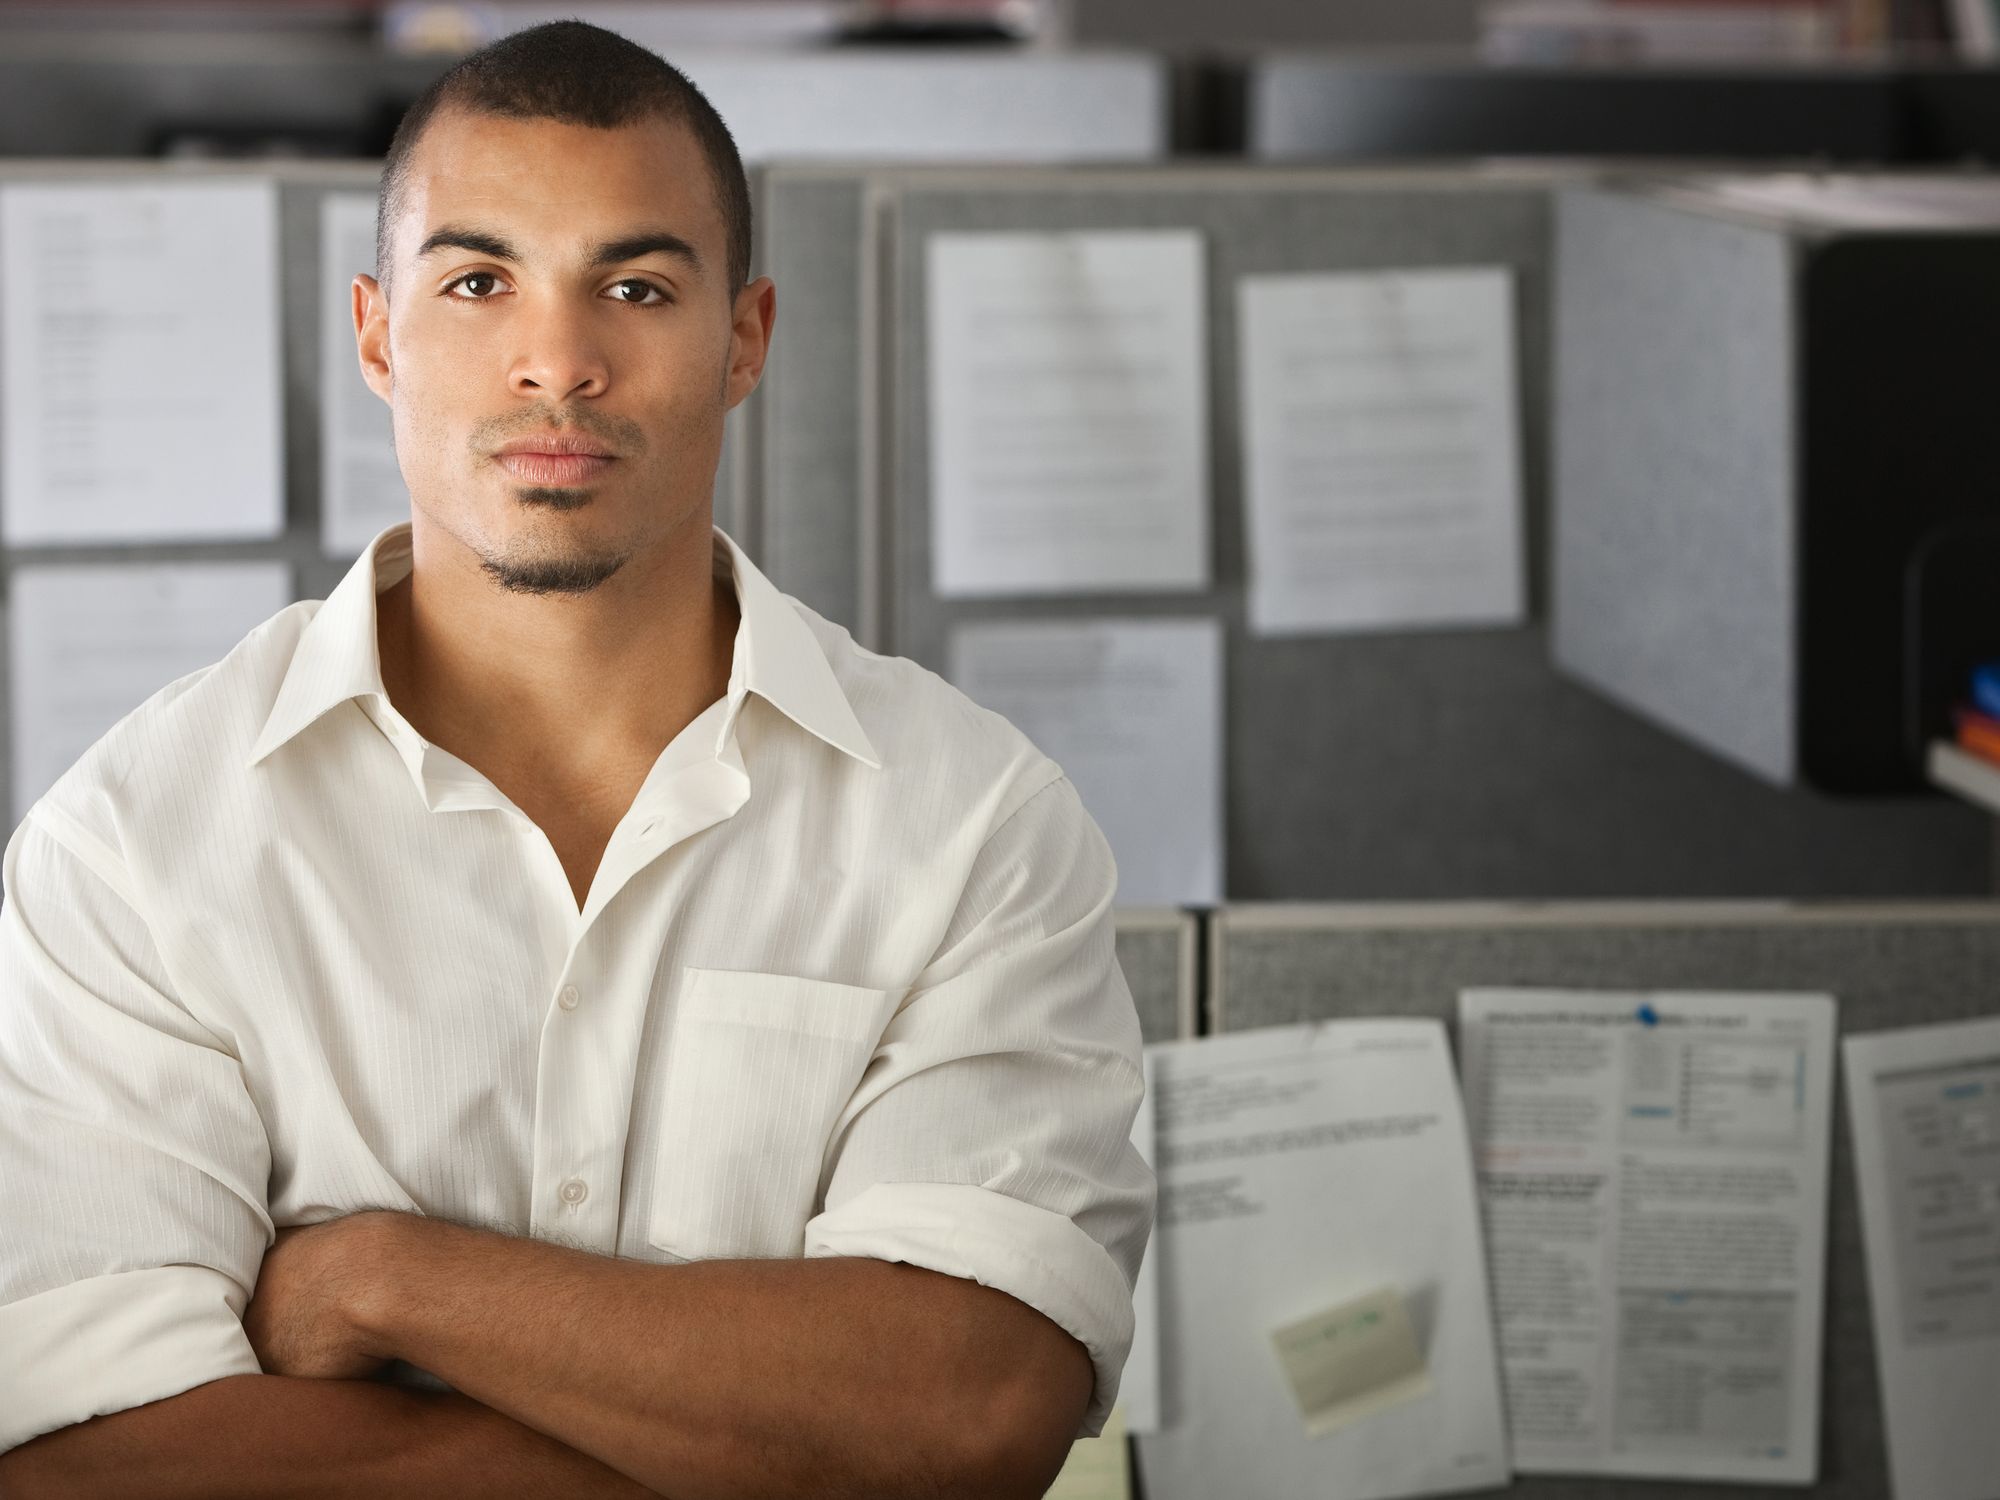 What are the federal laws prohibiting job discrimination?